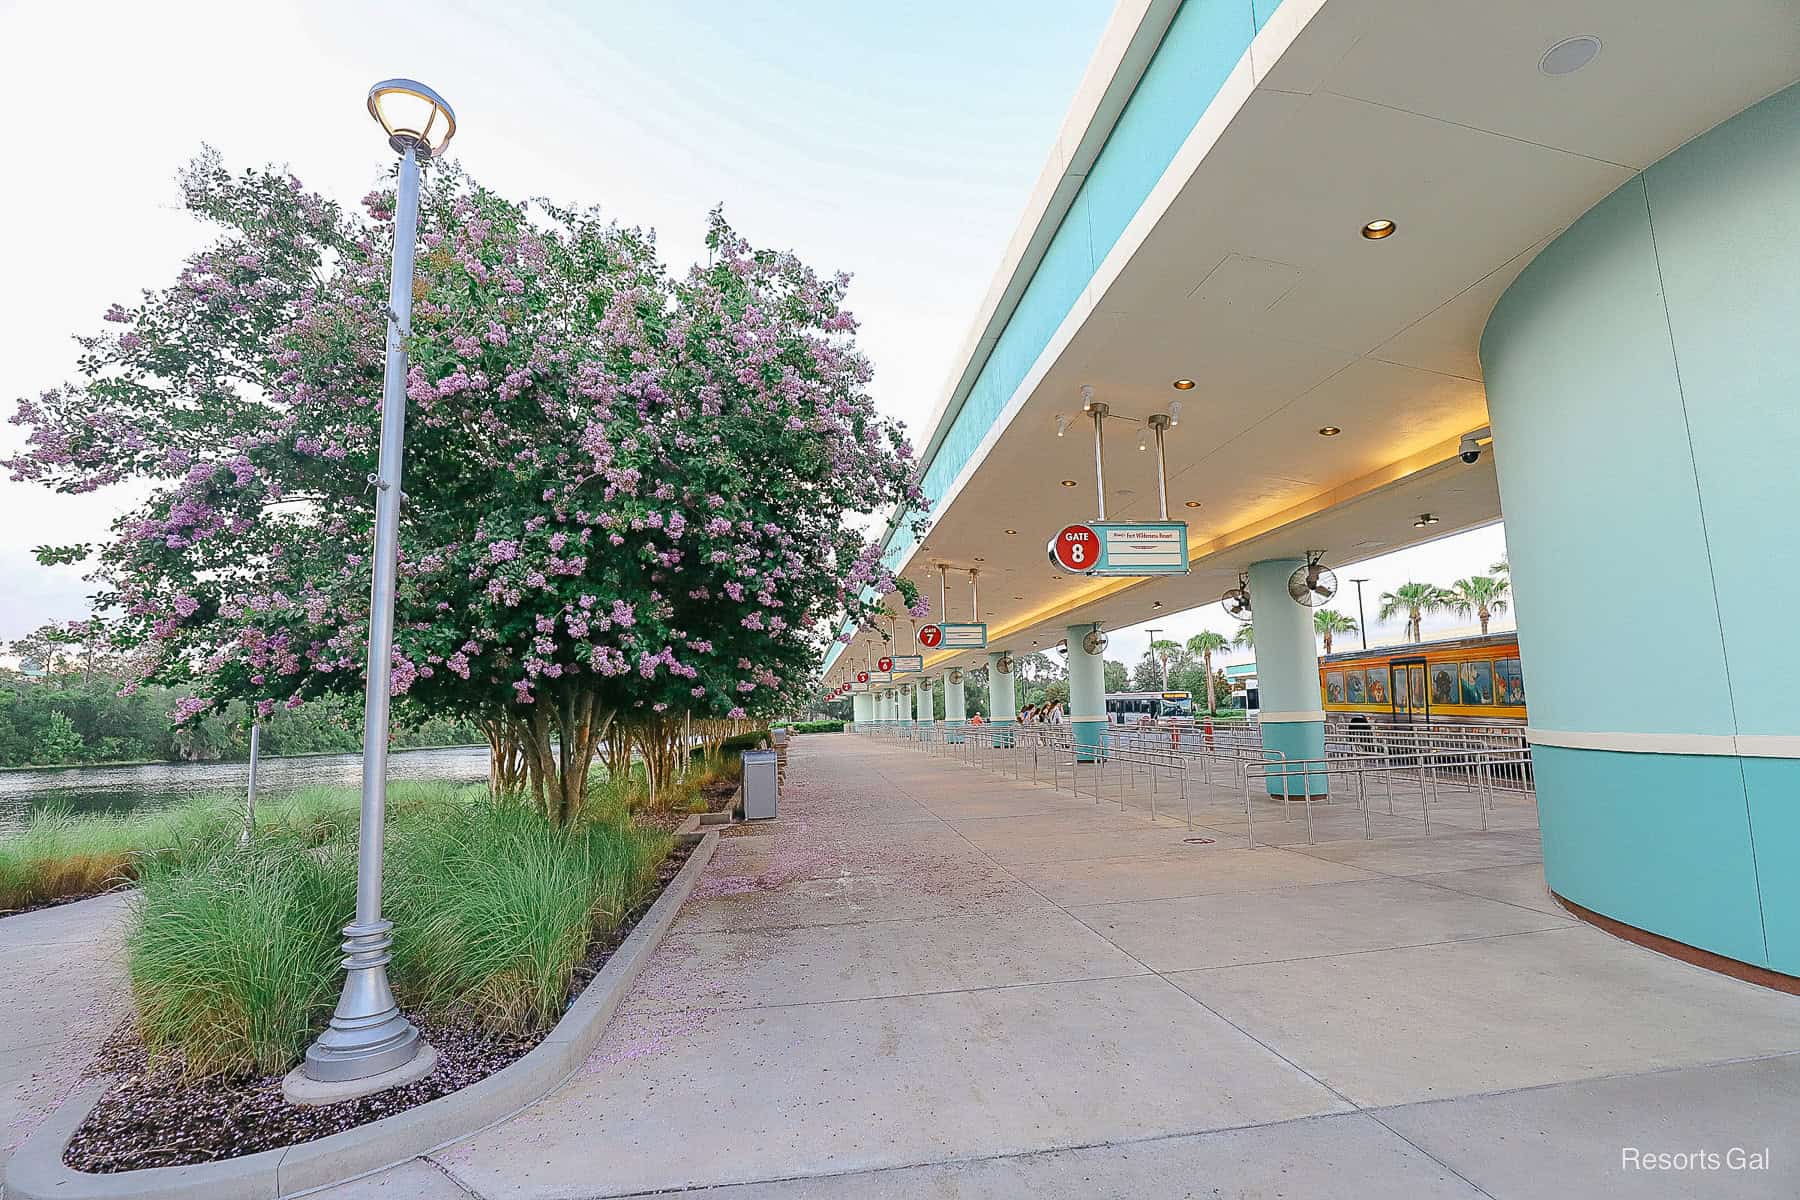 the bus stop at Disney's Hollywood Studios where the walking path begins 